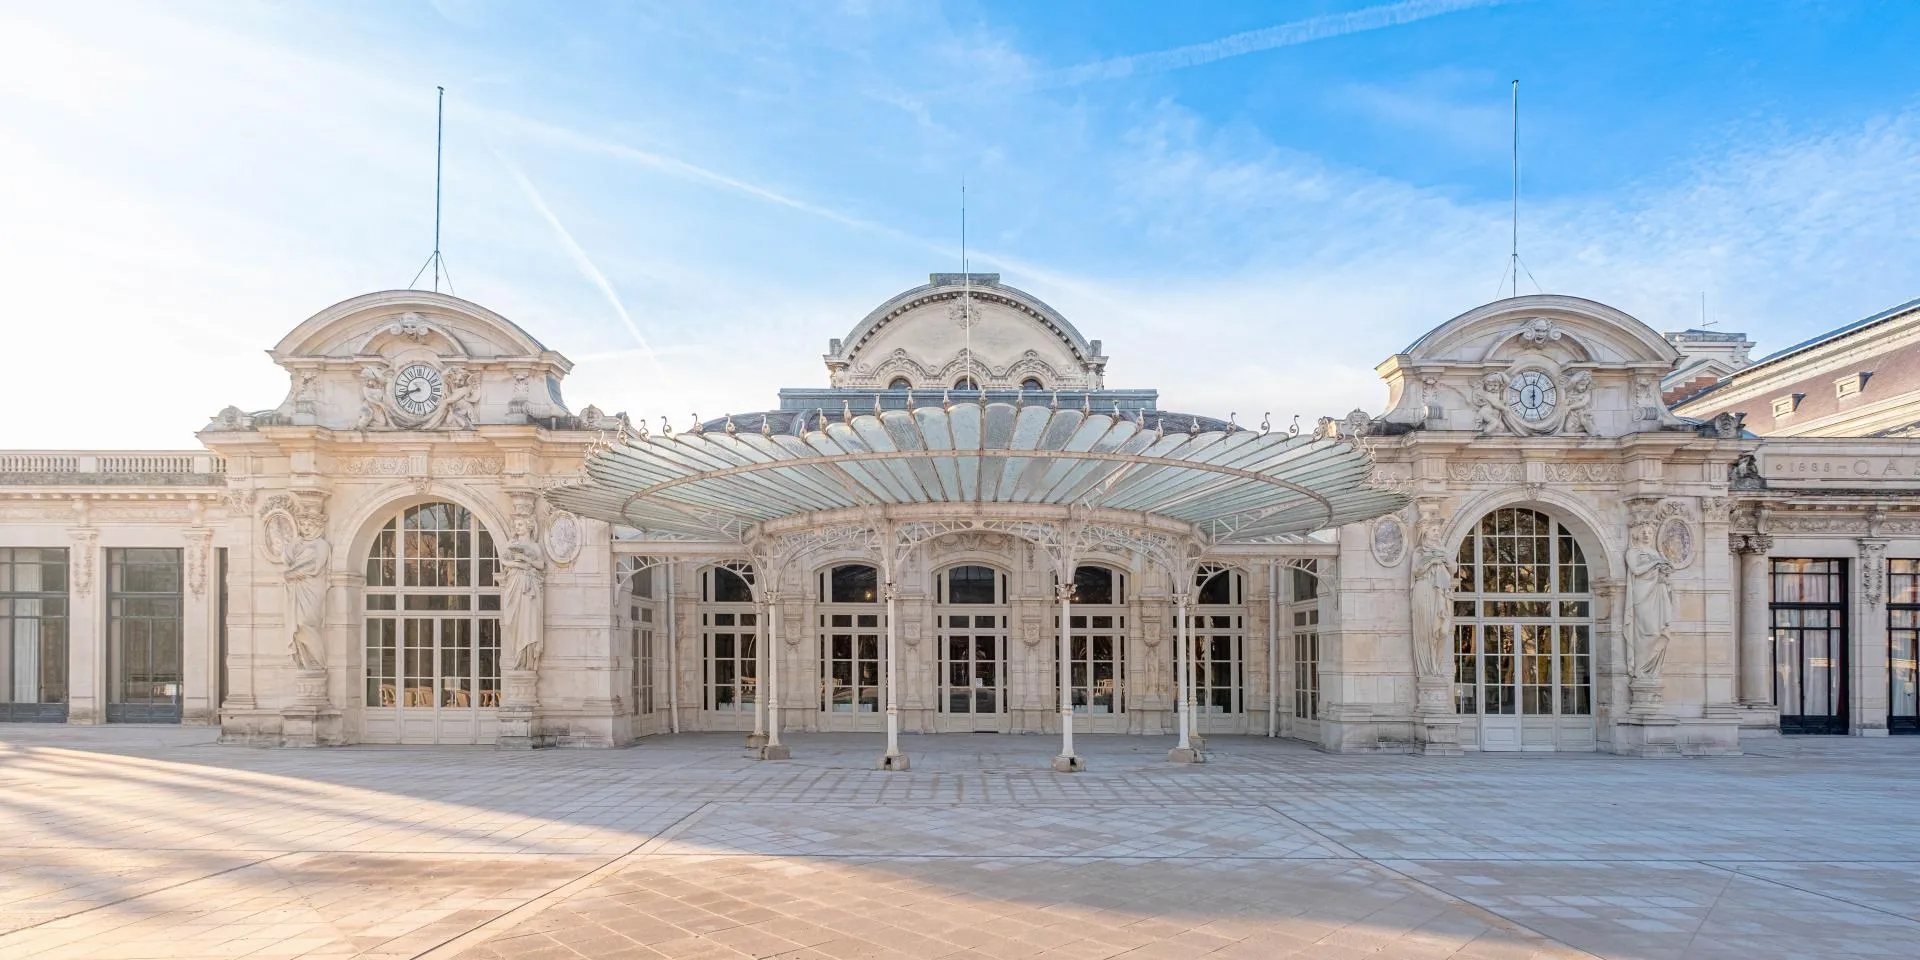 Congress Palace in France, Europe | Architecture - Rated 3.6